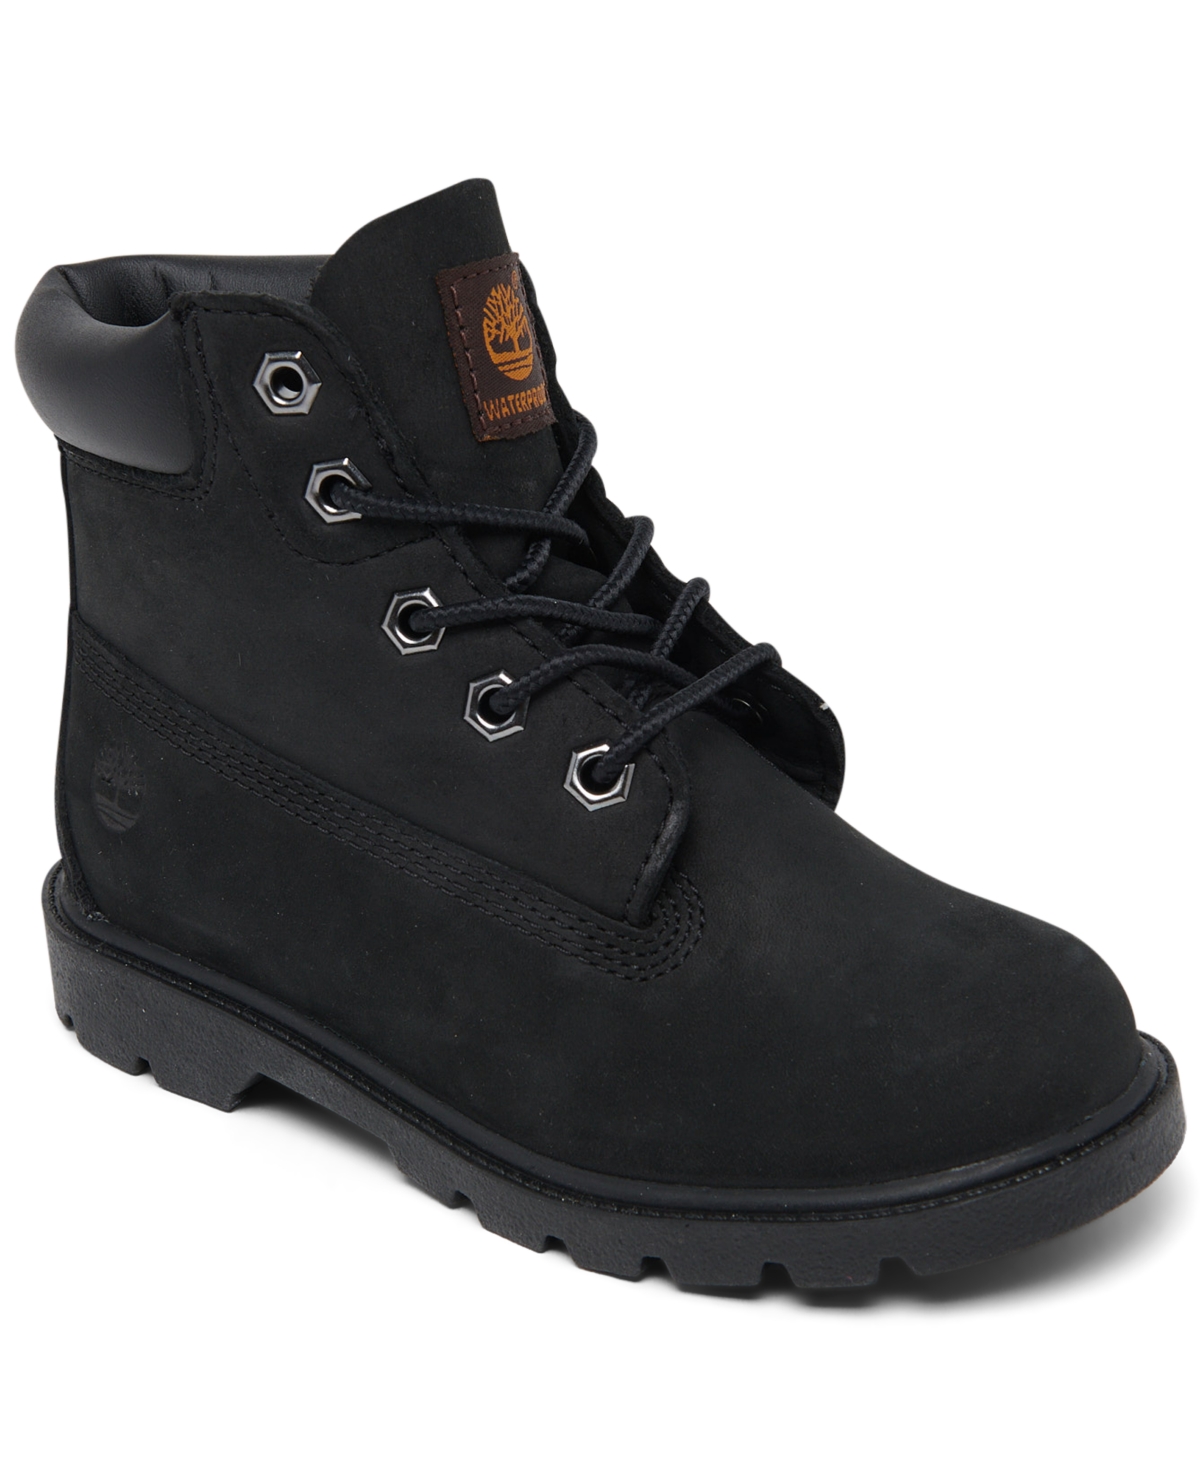 Timberland Babies' Toddler Kids 6" Classic Water Resistant Boots From Finish Line In Black